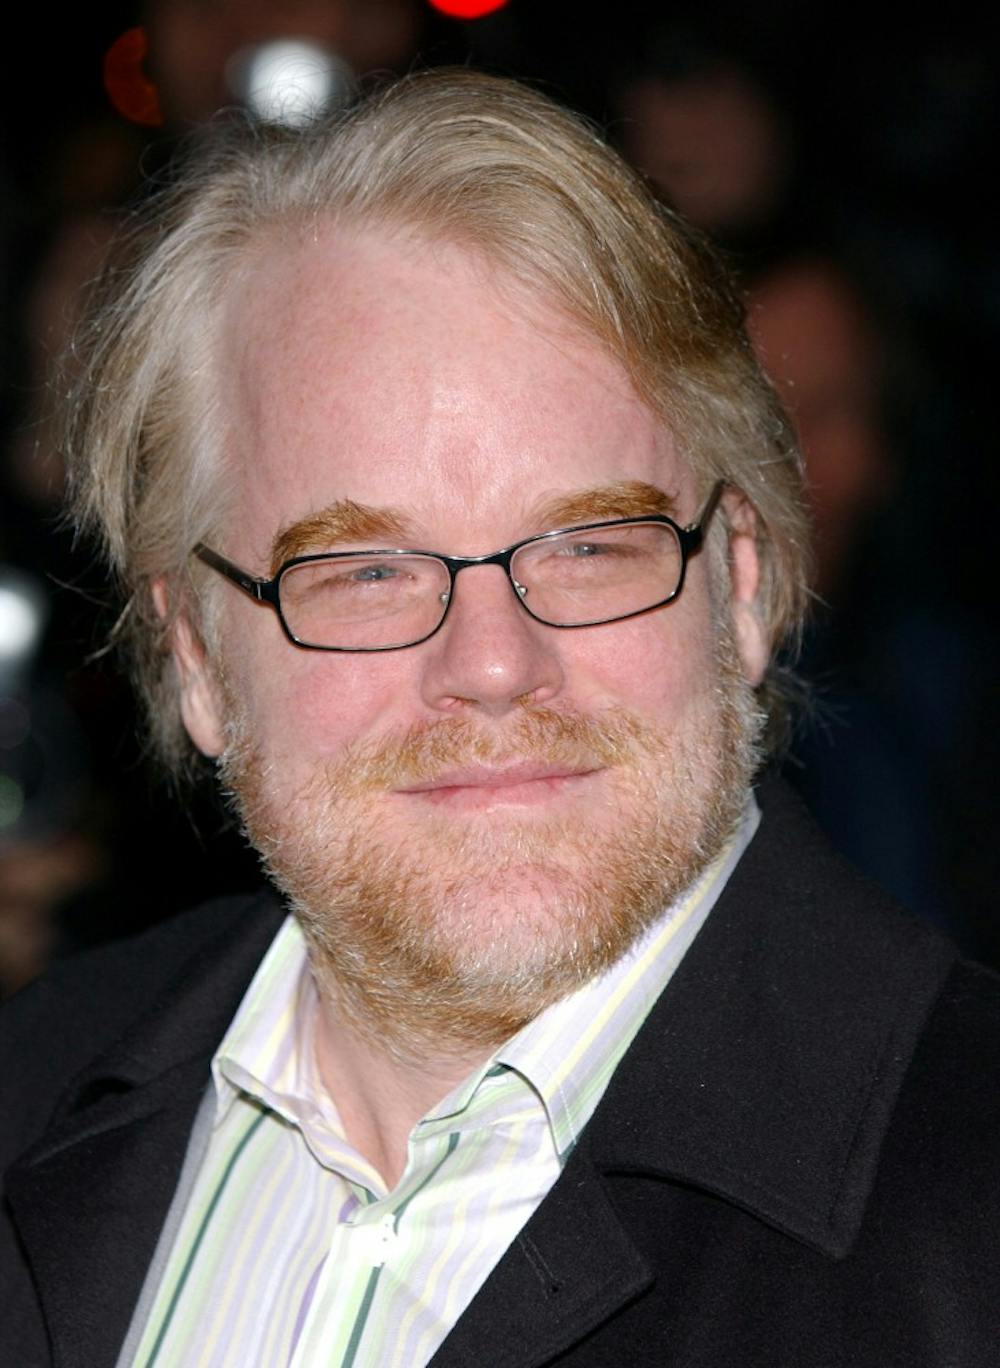 Actor Philip Seymour Hoffman arrives at the 71st annual New York Film Critics Circle Awards dinner held at Cipriani's 42nd street in New York, on Sunday January 8, 2006. Hoffman won best actor for "Capote." (Nicolas Khayat/Abaca Press/KRT)